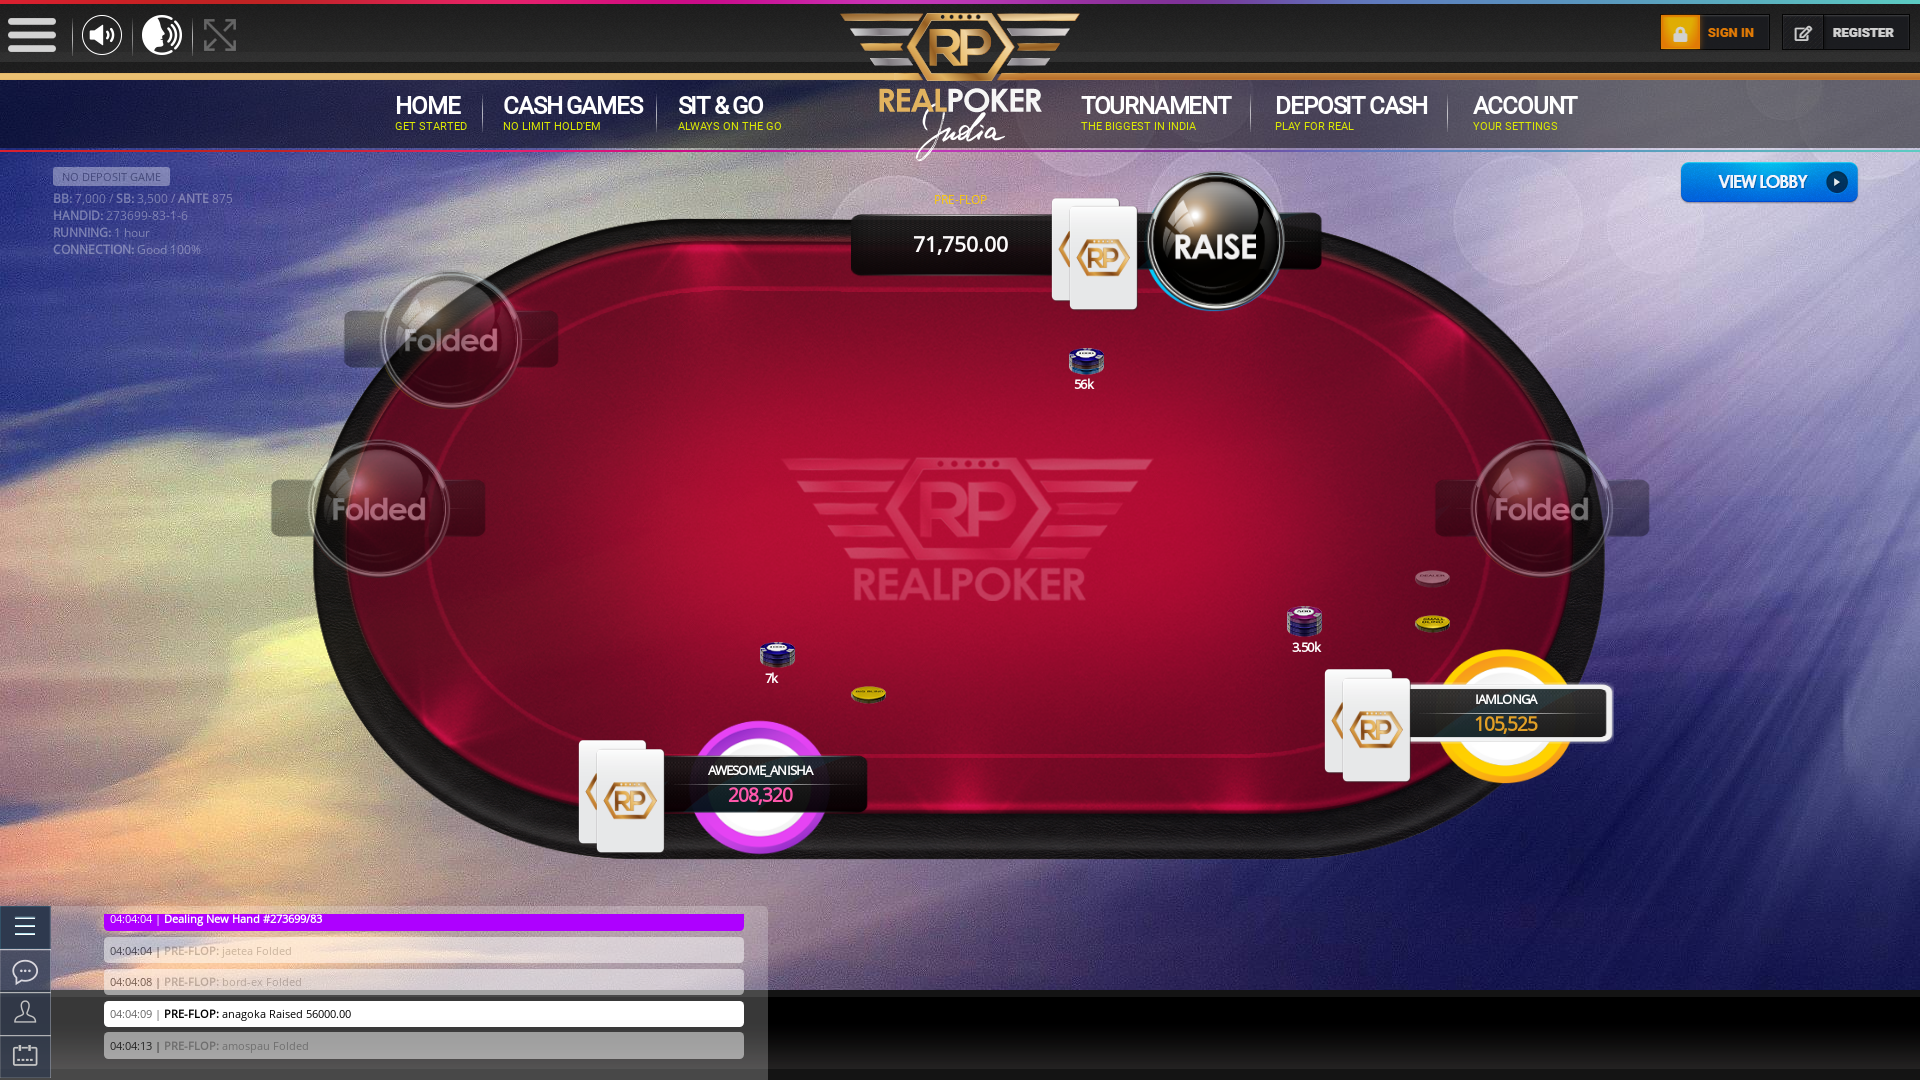 Real poker 10 player table in the 81st minute